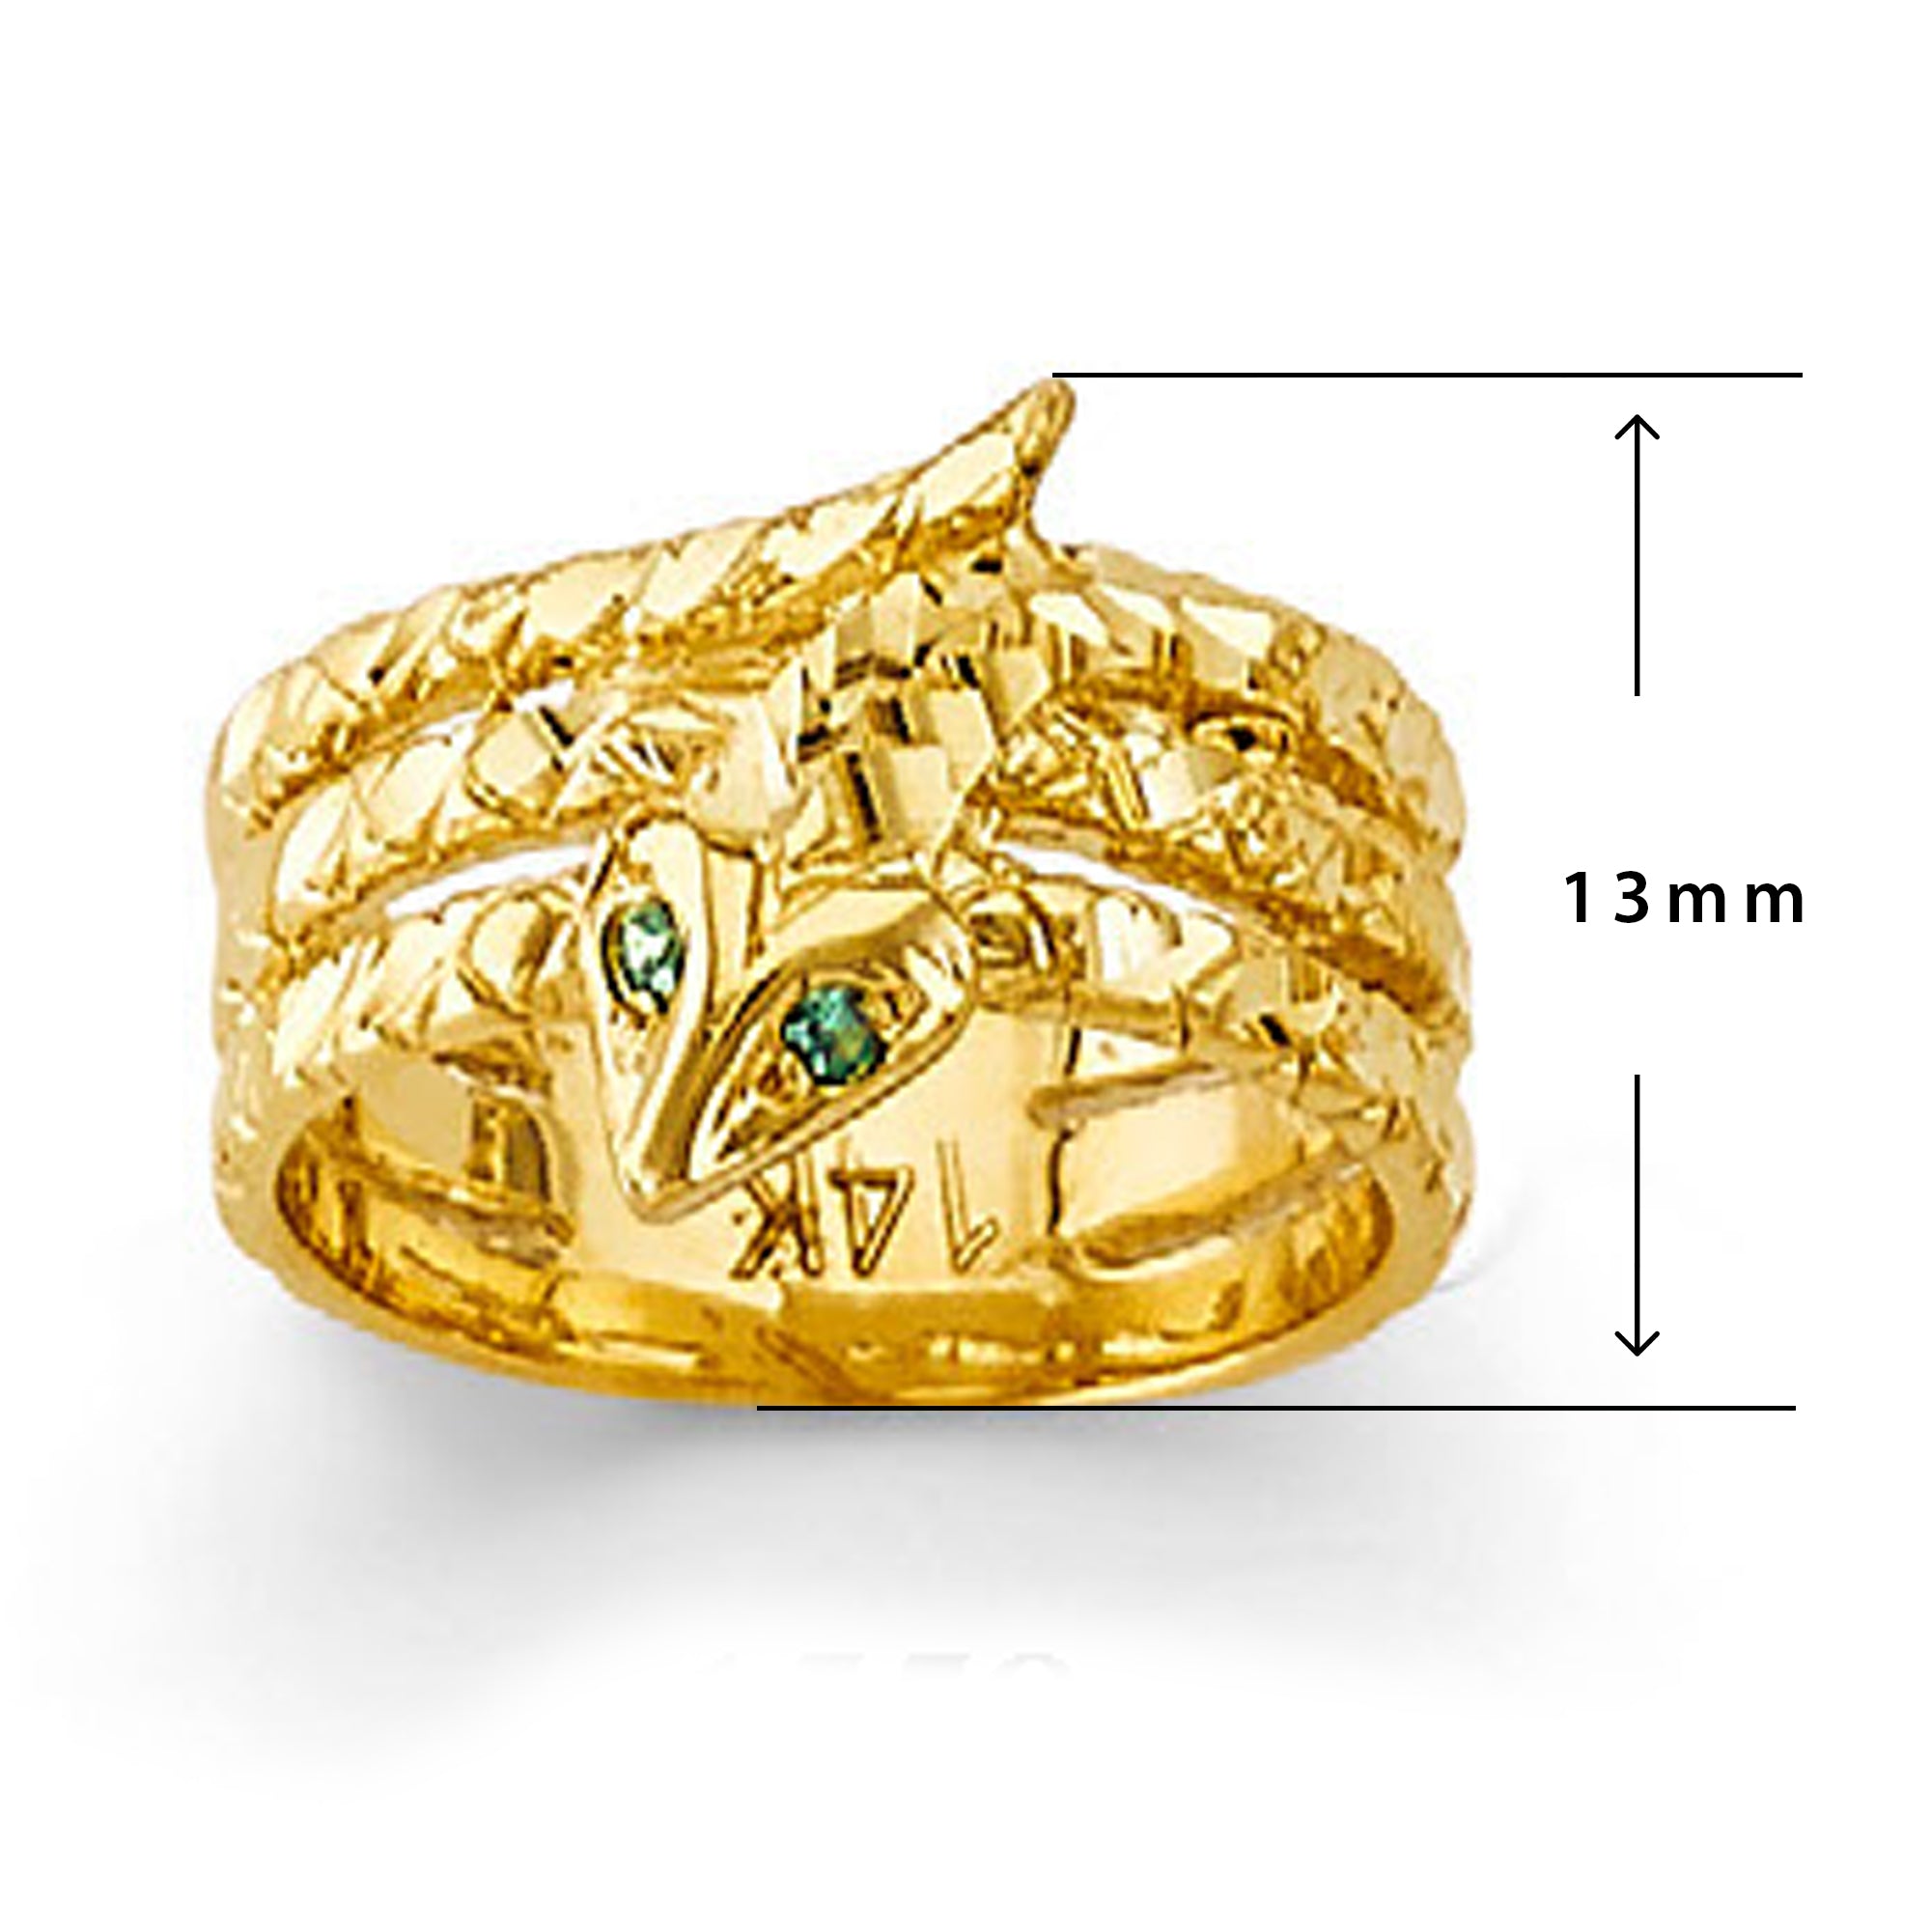 Emerald-eyed Serpent Ring in Solid Gold with Measurement